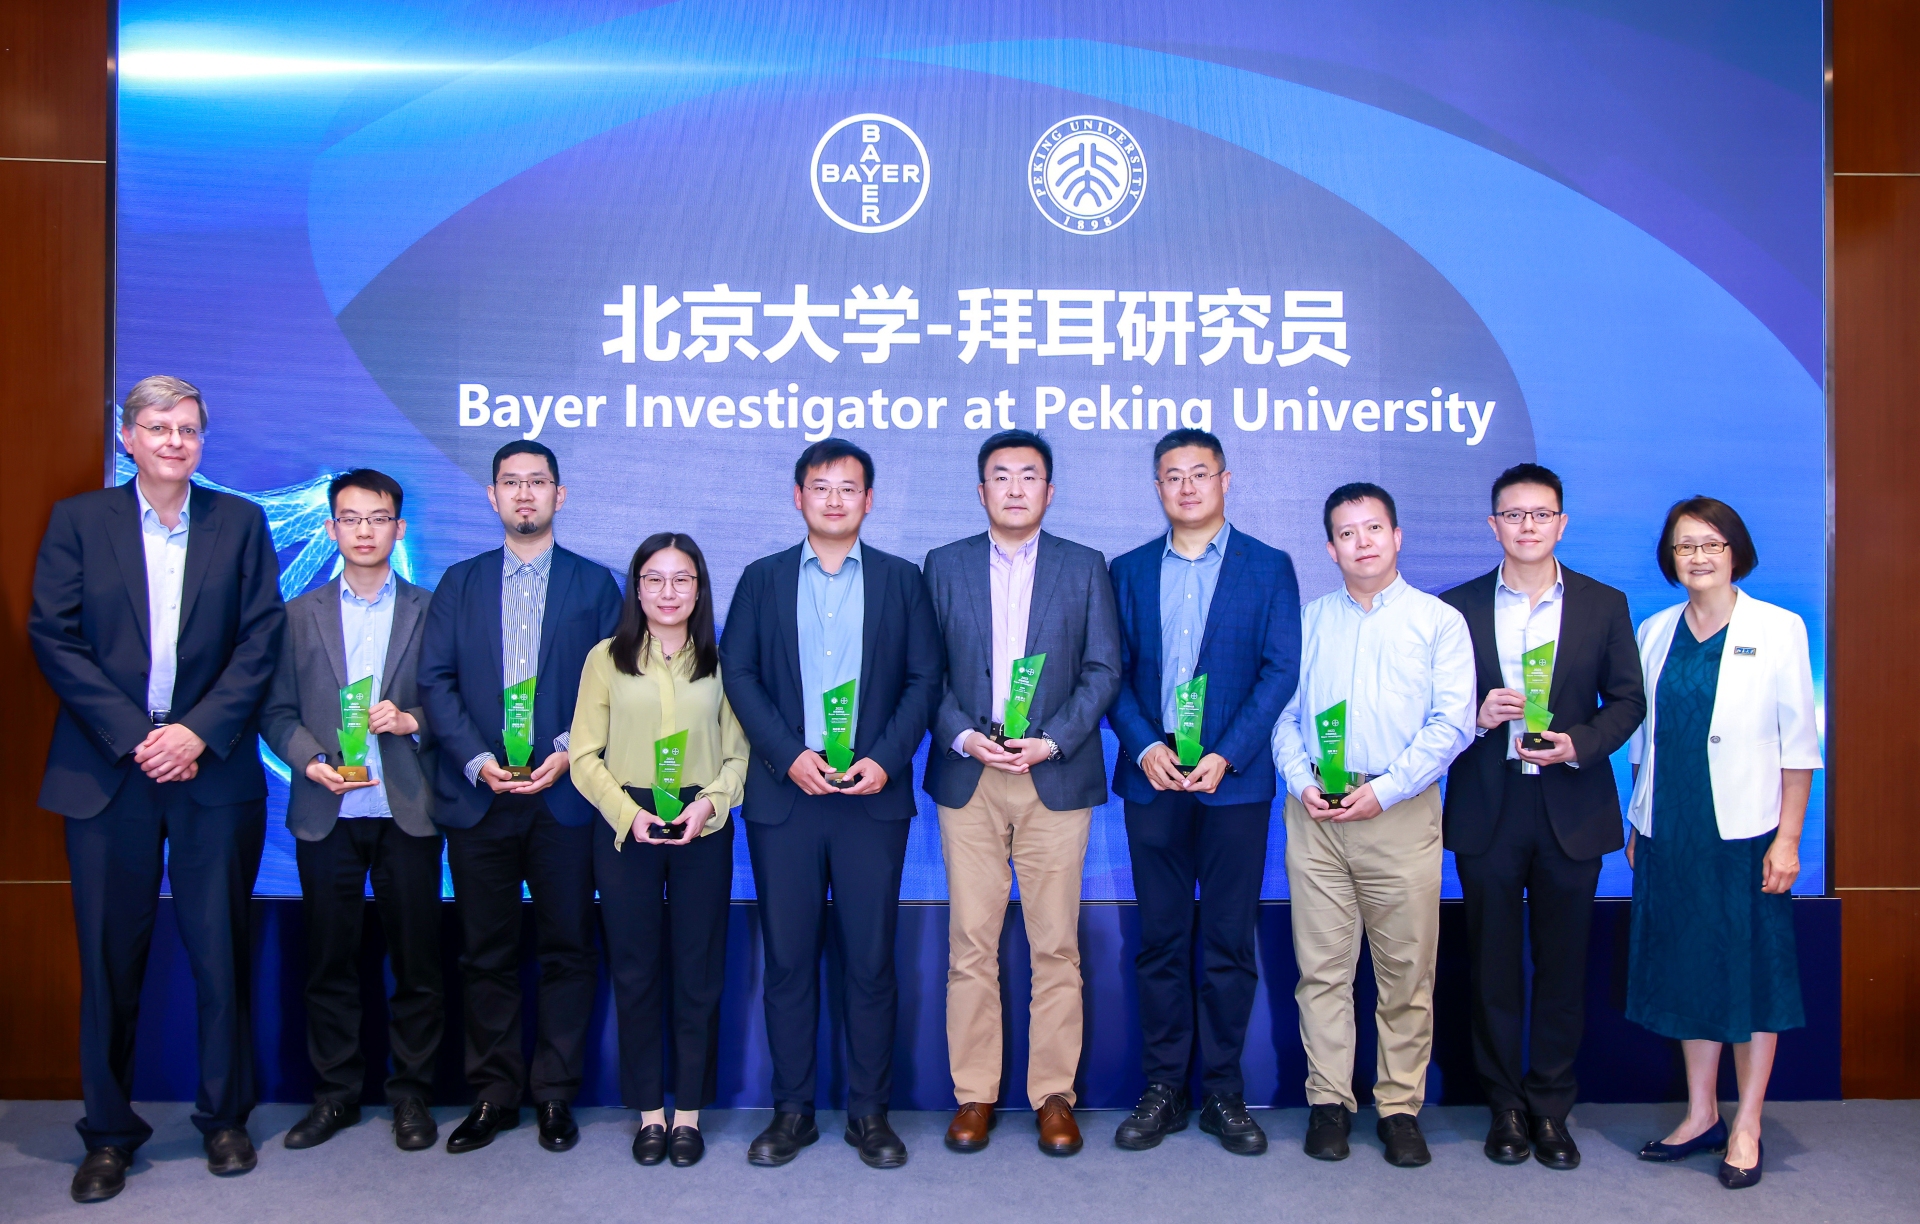 Dr Ulrich Nielsch, a member of the Bayer Joint Steering Committee, and Professor Hong Wu presented the Bayer Investigator award to researchers from Peking University.